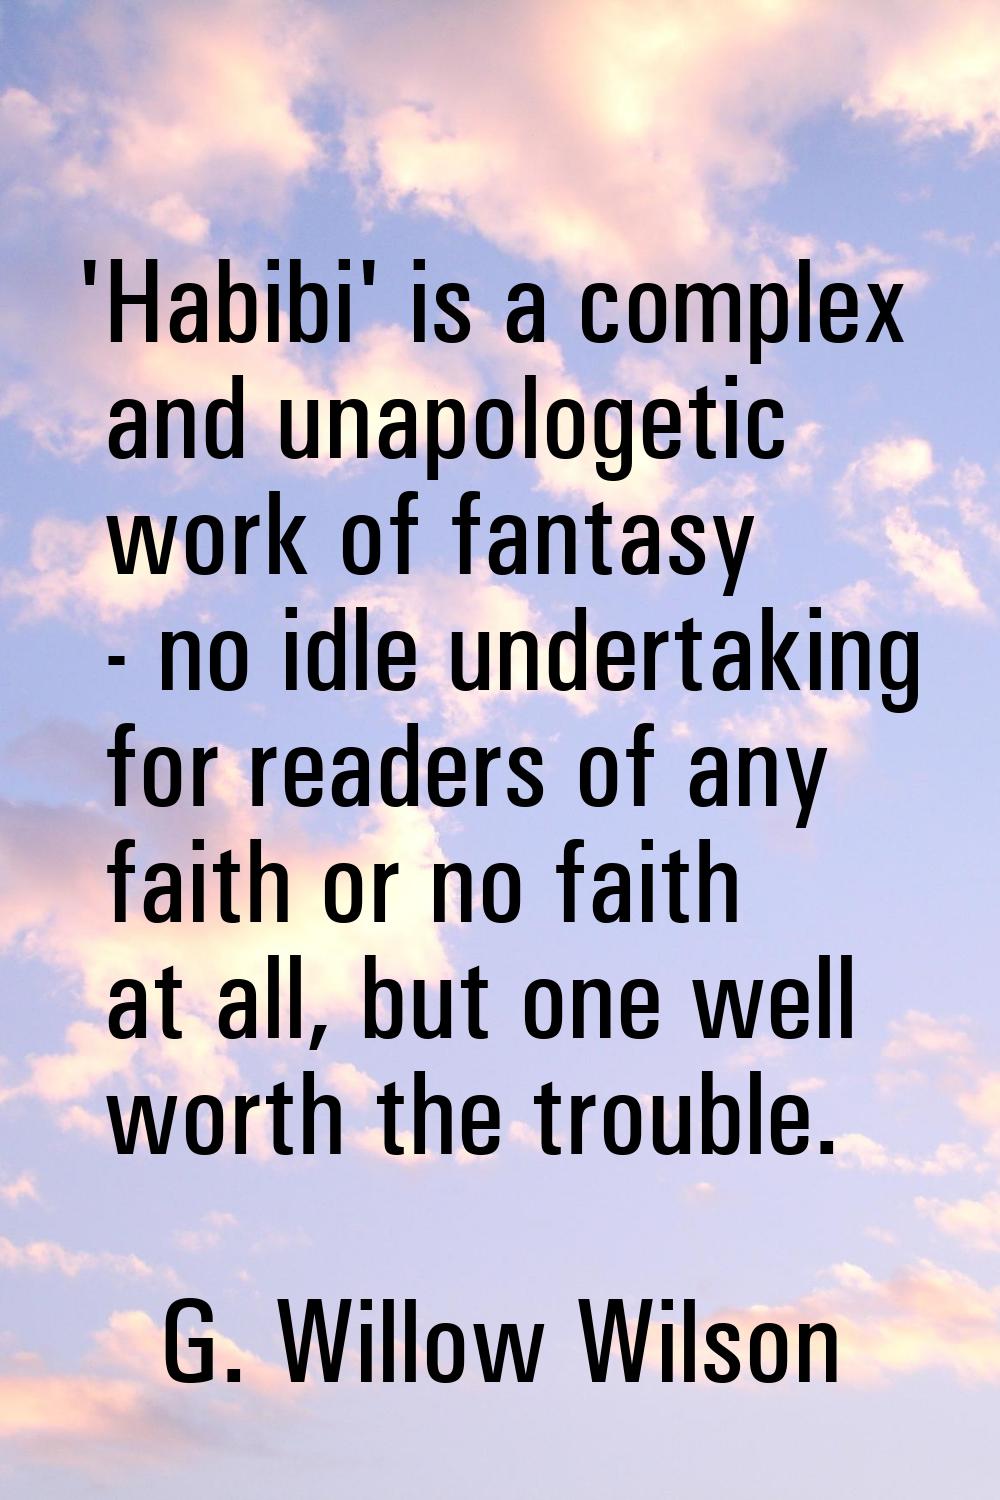 'Habibi' is a complex and unapologetic work of fantasy - no idle undertaking for readers of any fai